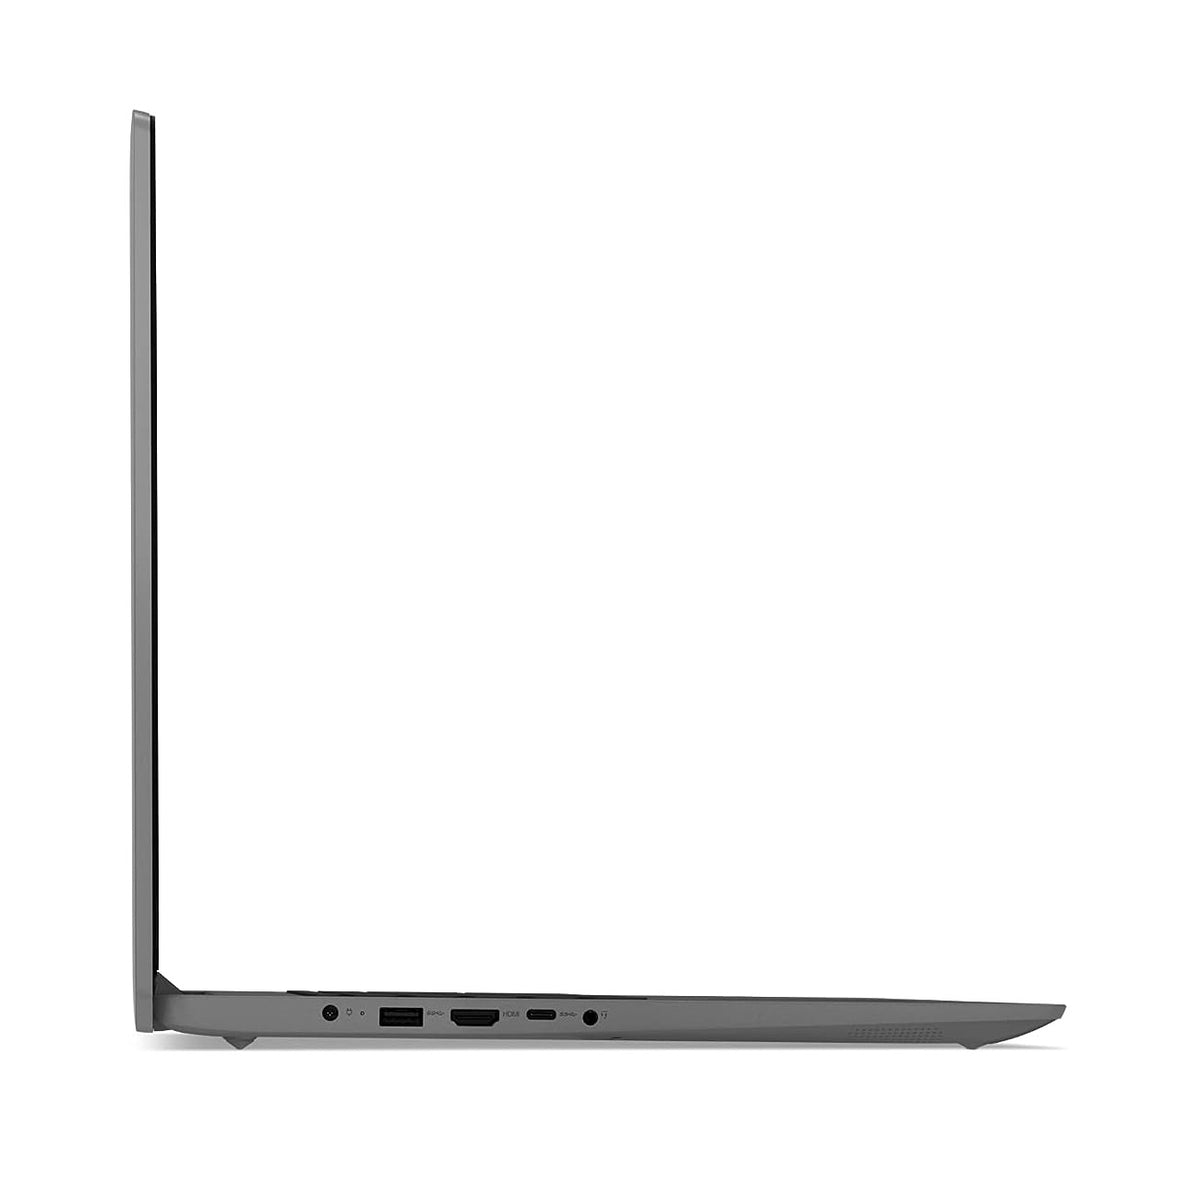 Lenovo IdeaPad 3 15&quot; Intel Core i7 8GB/1TB SSD Laptop - Artic Grey | 82H802RGUK from Lenovo - DID Electrical